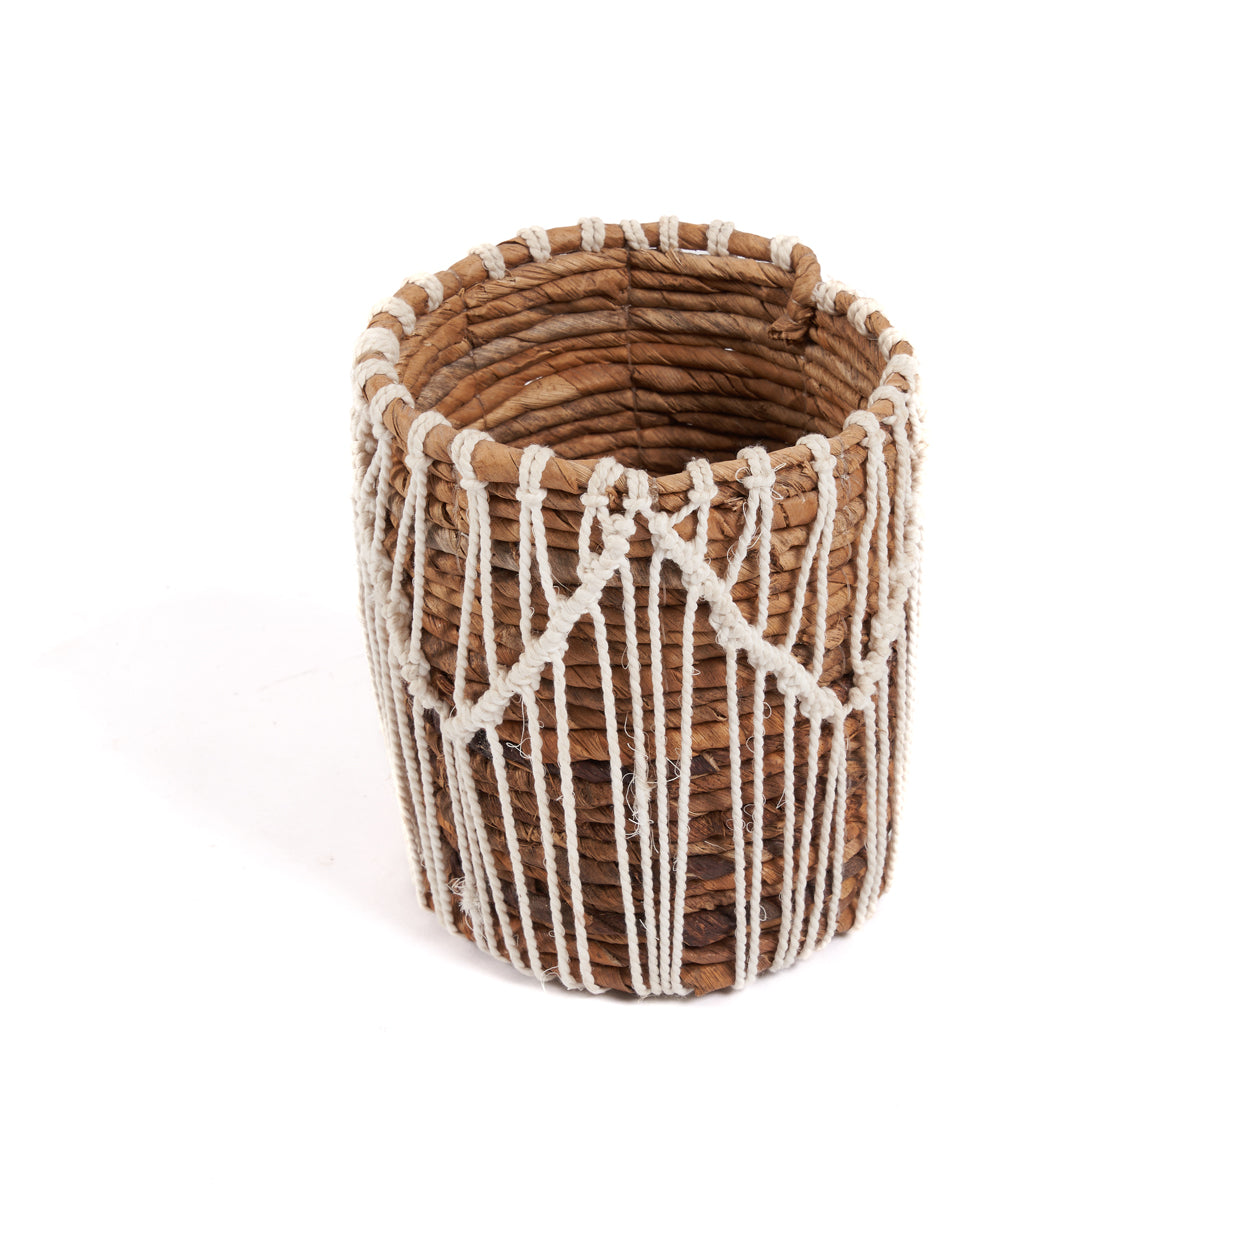 THE MACRA-MAZING Basket - Natural White Small